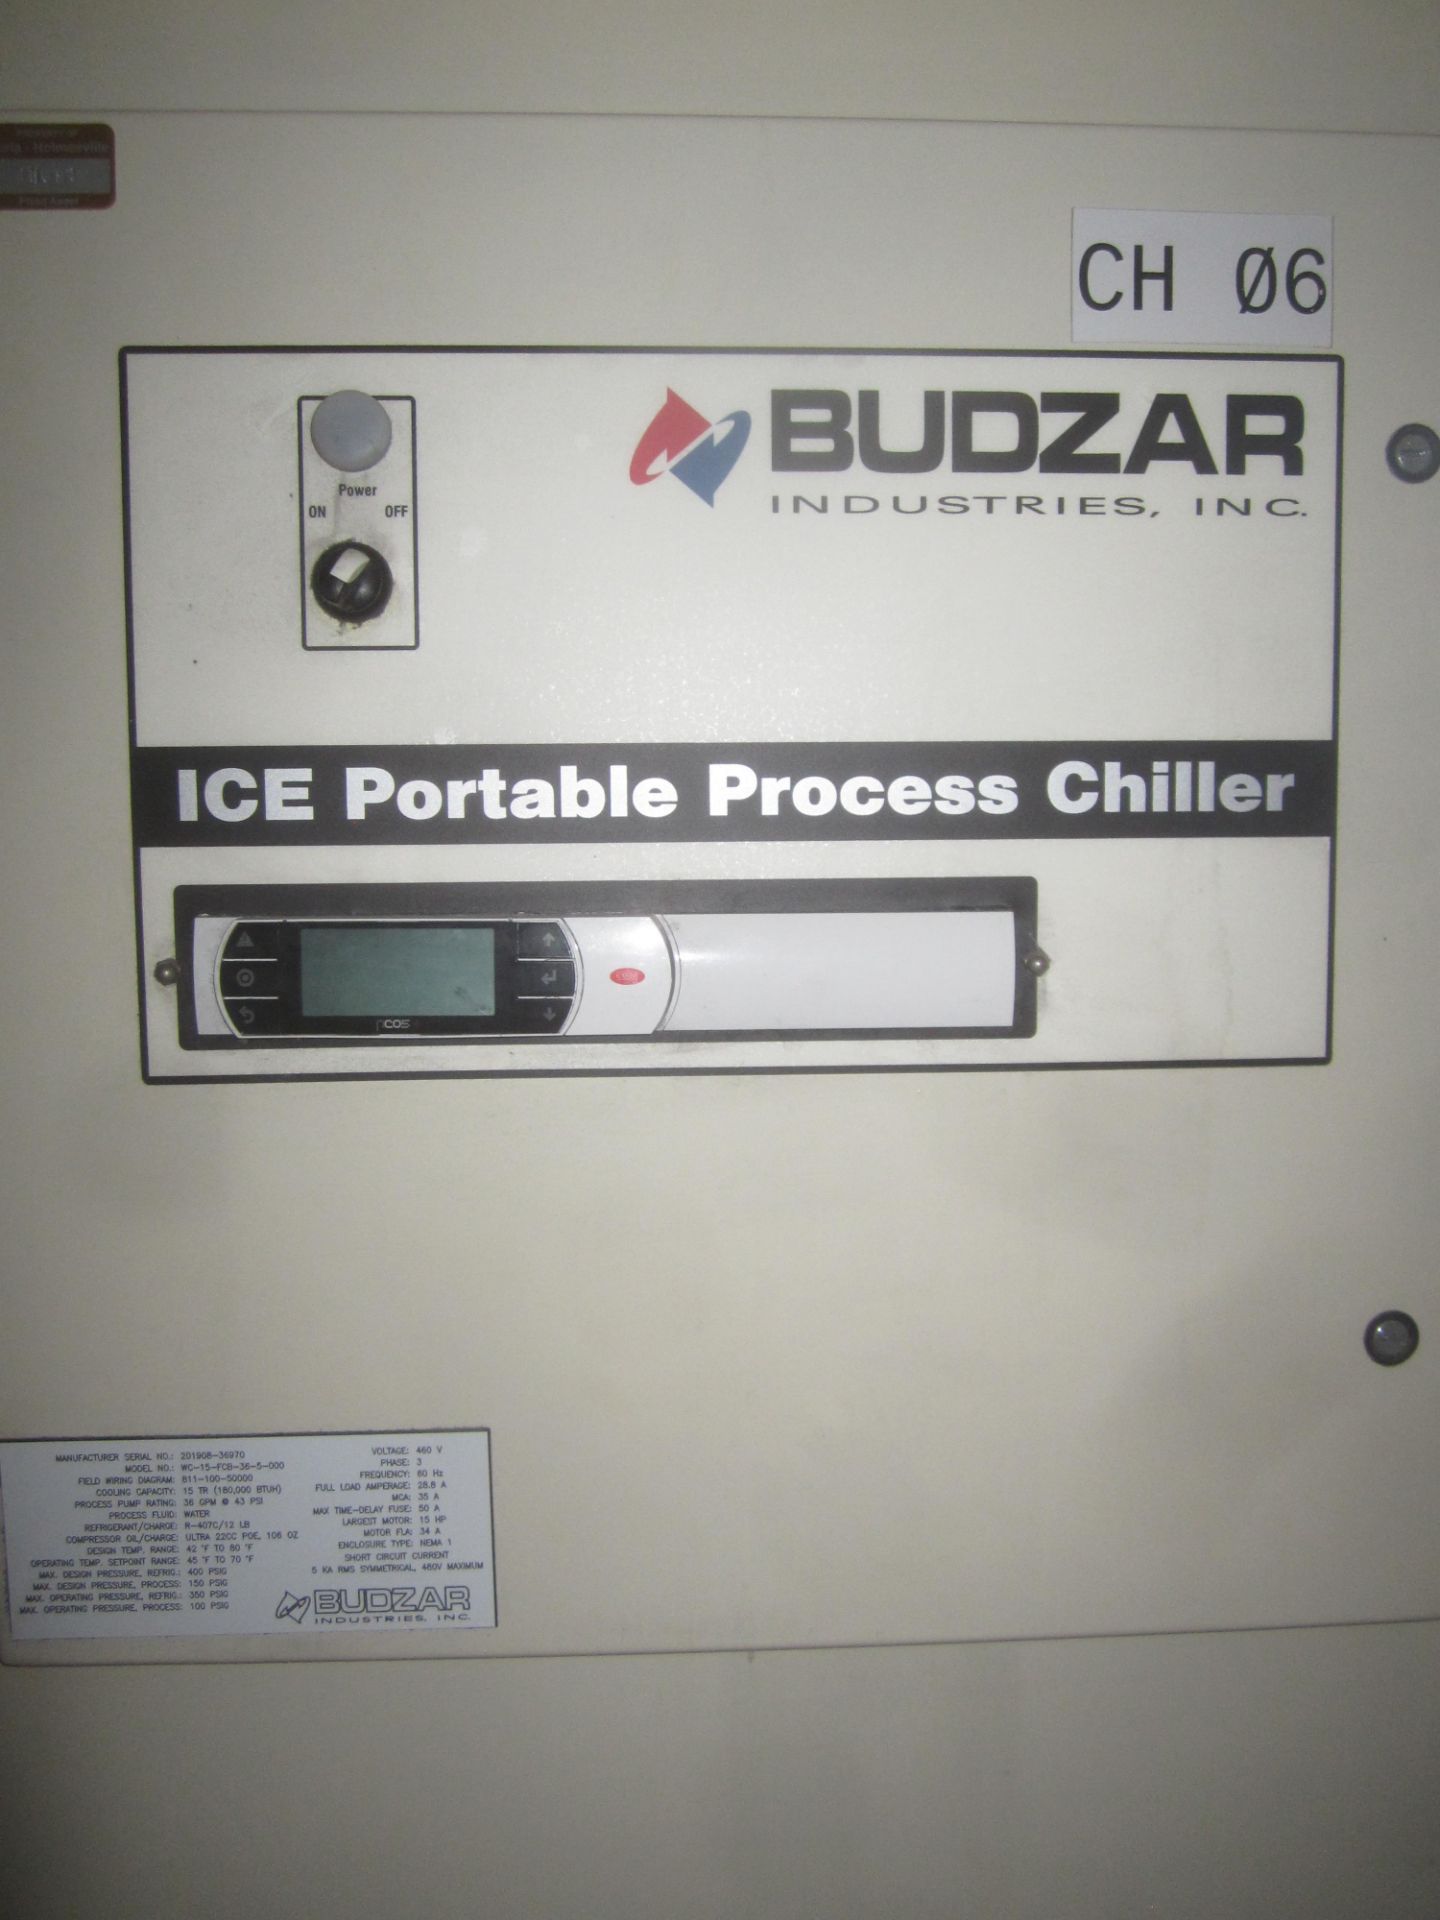 Budzar Model WC-15-FCB-36-5-000 Water Cooled Portable Chiller, s/n 201908-36970, 460/3/60 - Image 3 of 4